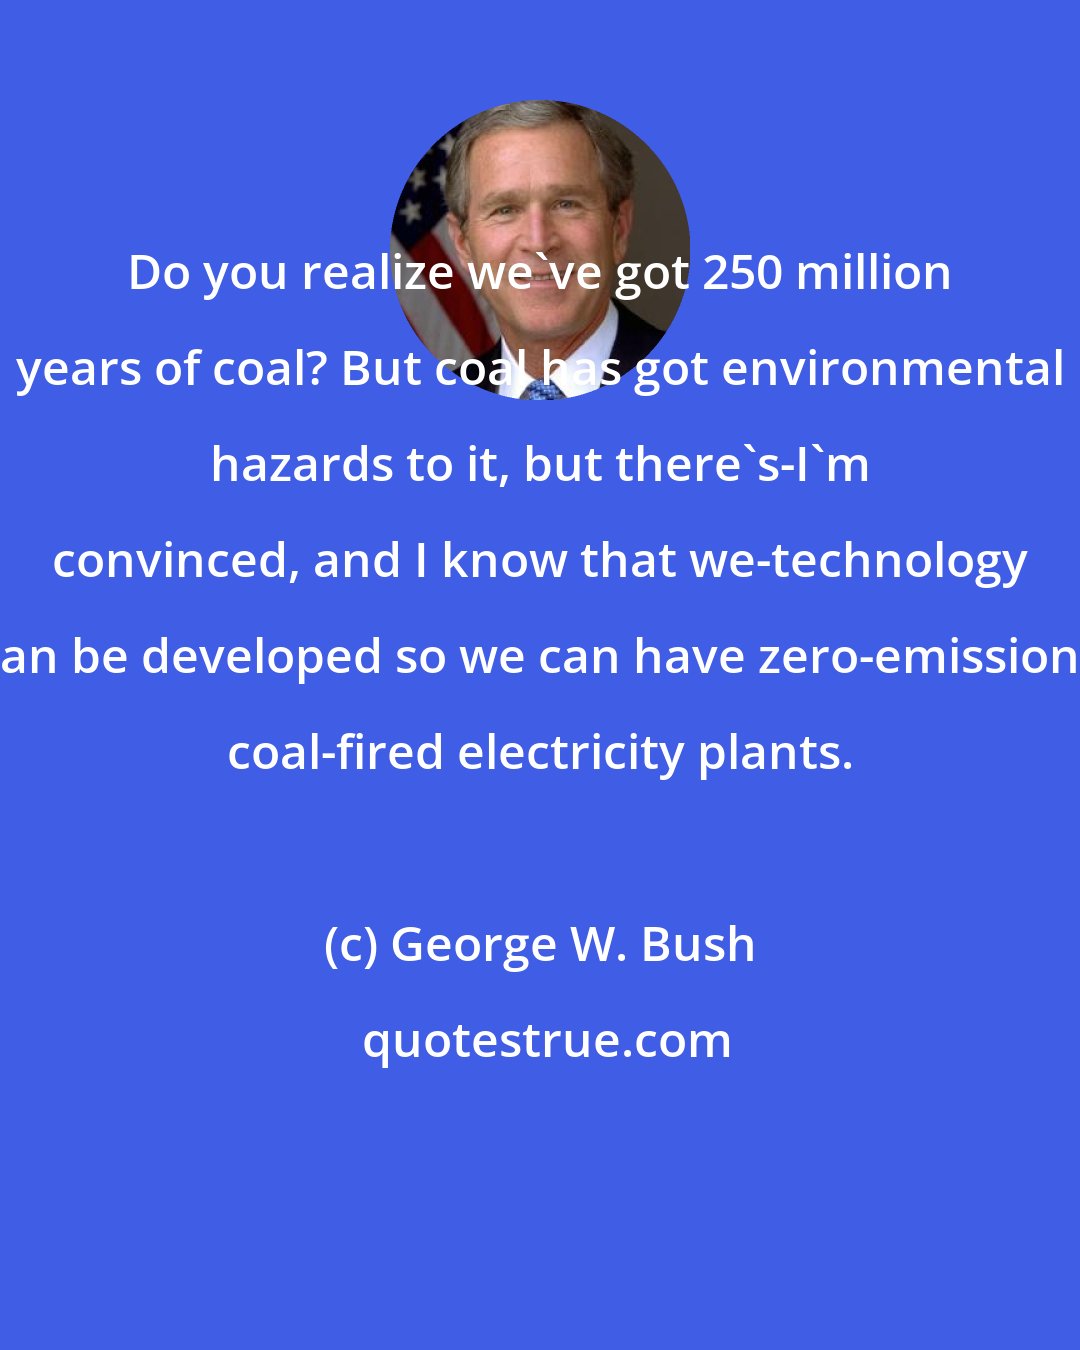 George W. Bush: Do you realize we've got 250 million years of coal? But coal has got environmental hazards to it, but there's-I'm convinced, and I know that we-technology can be developed so we can have zero-emissions coal-fired electricity plants.